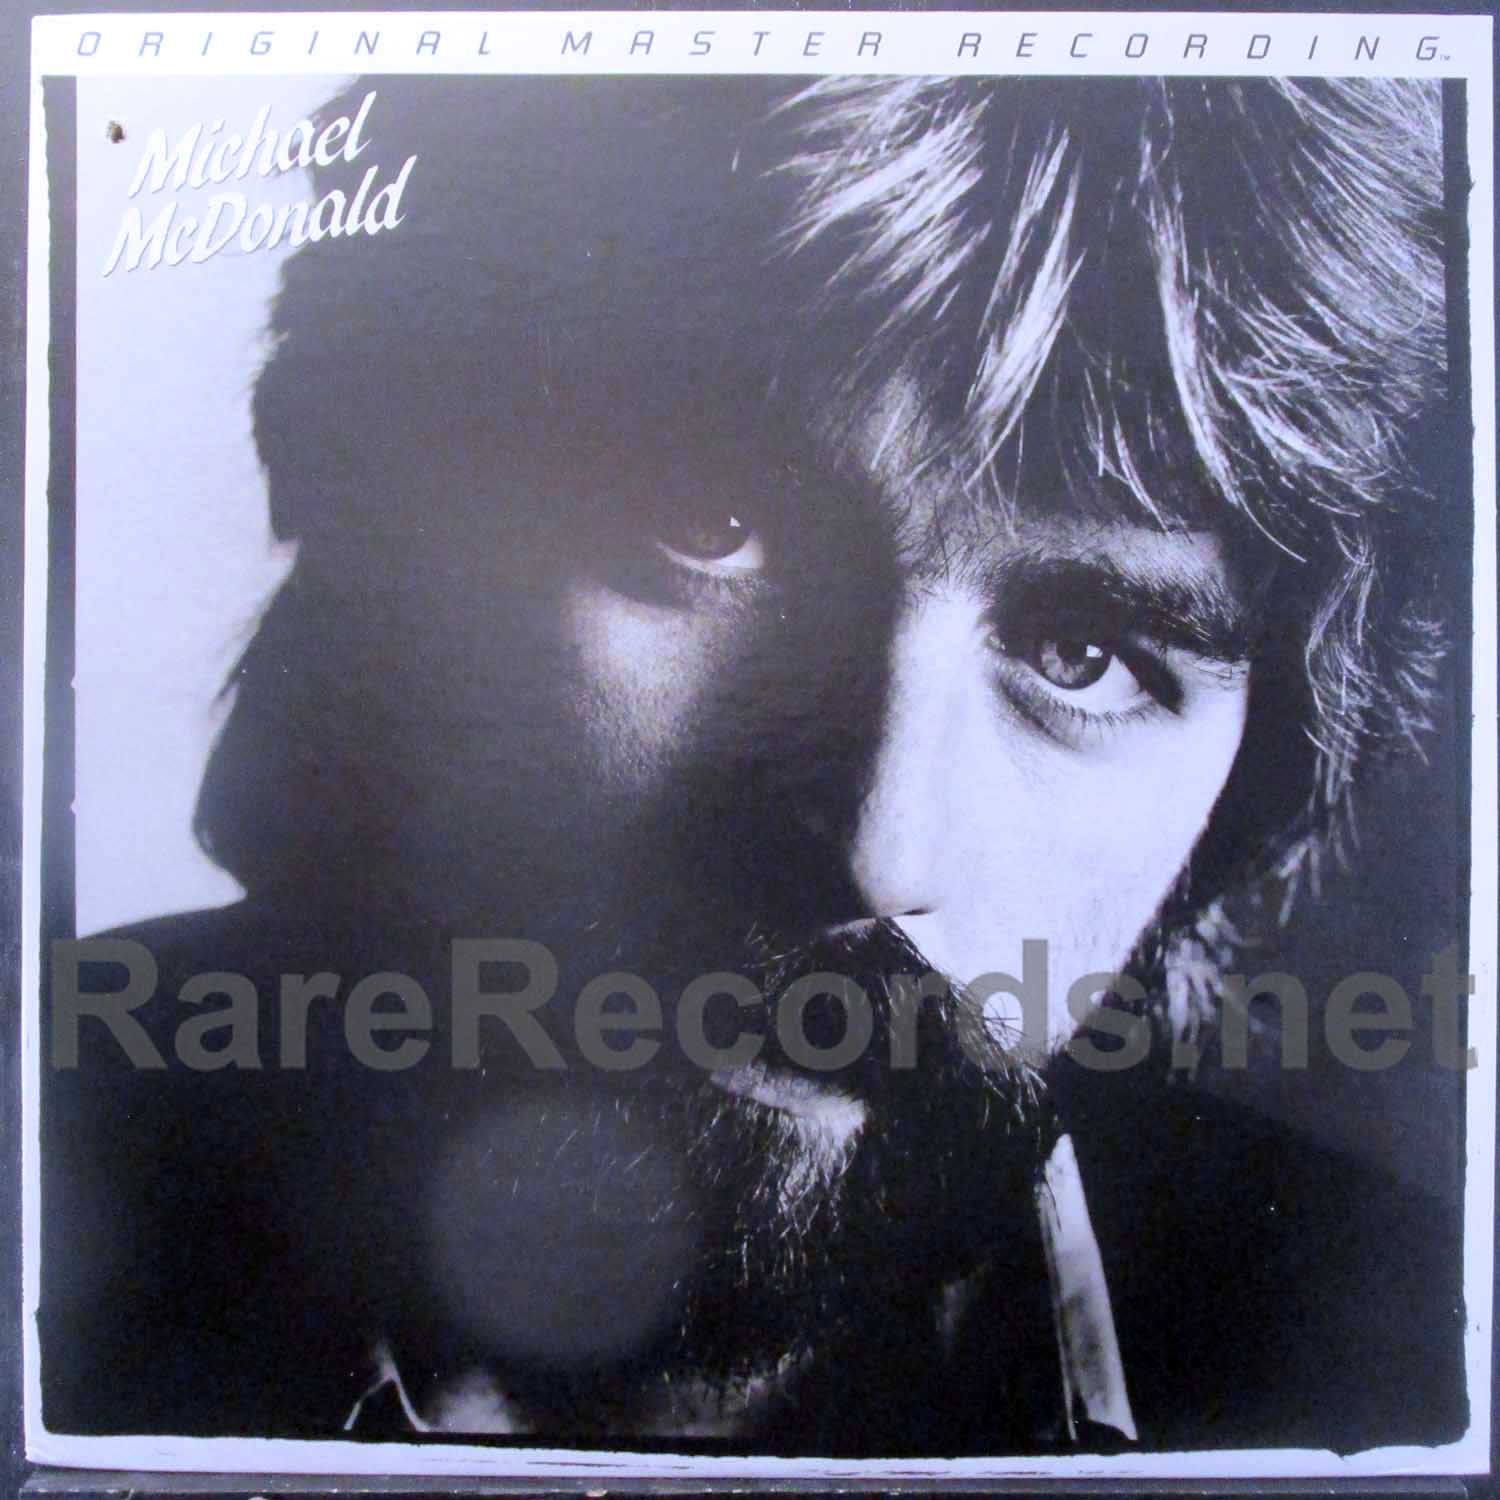 Michael McDonald - If That's What It Takes mobile fidelity lp